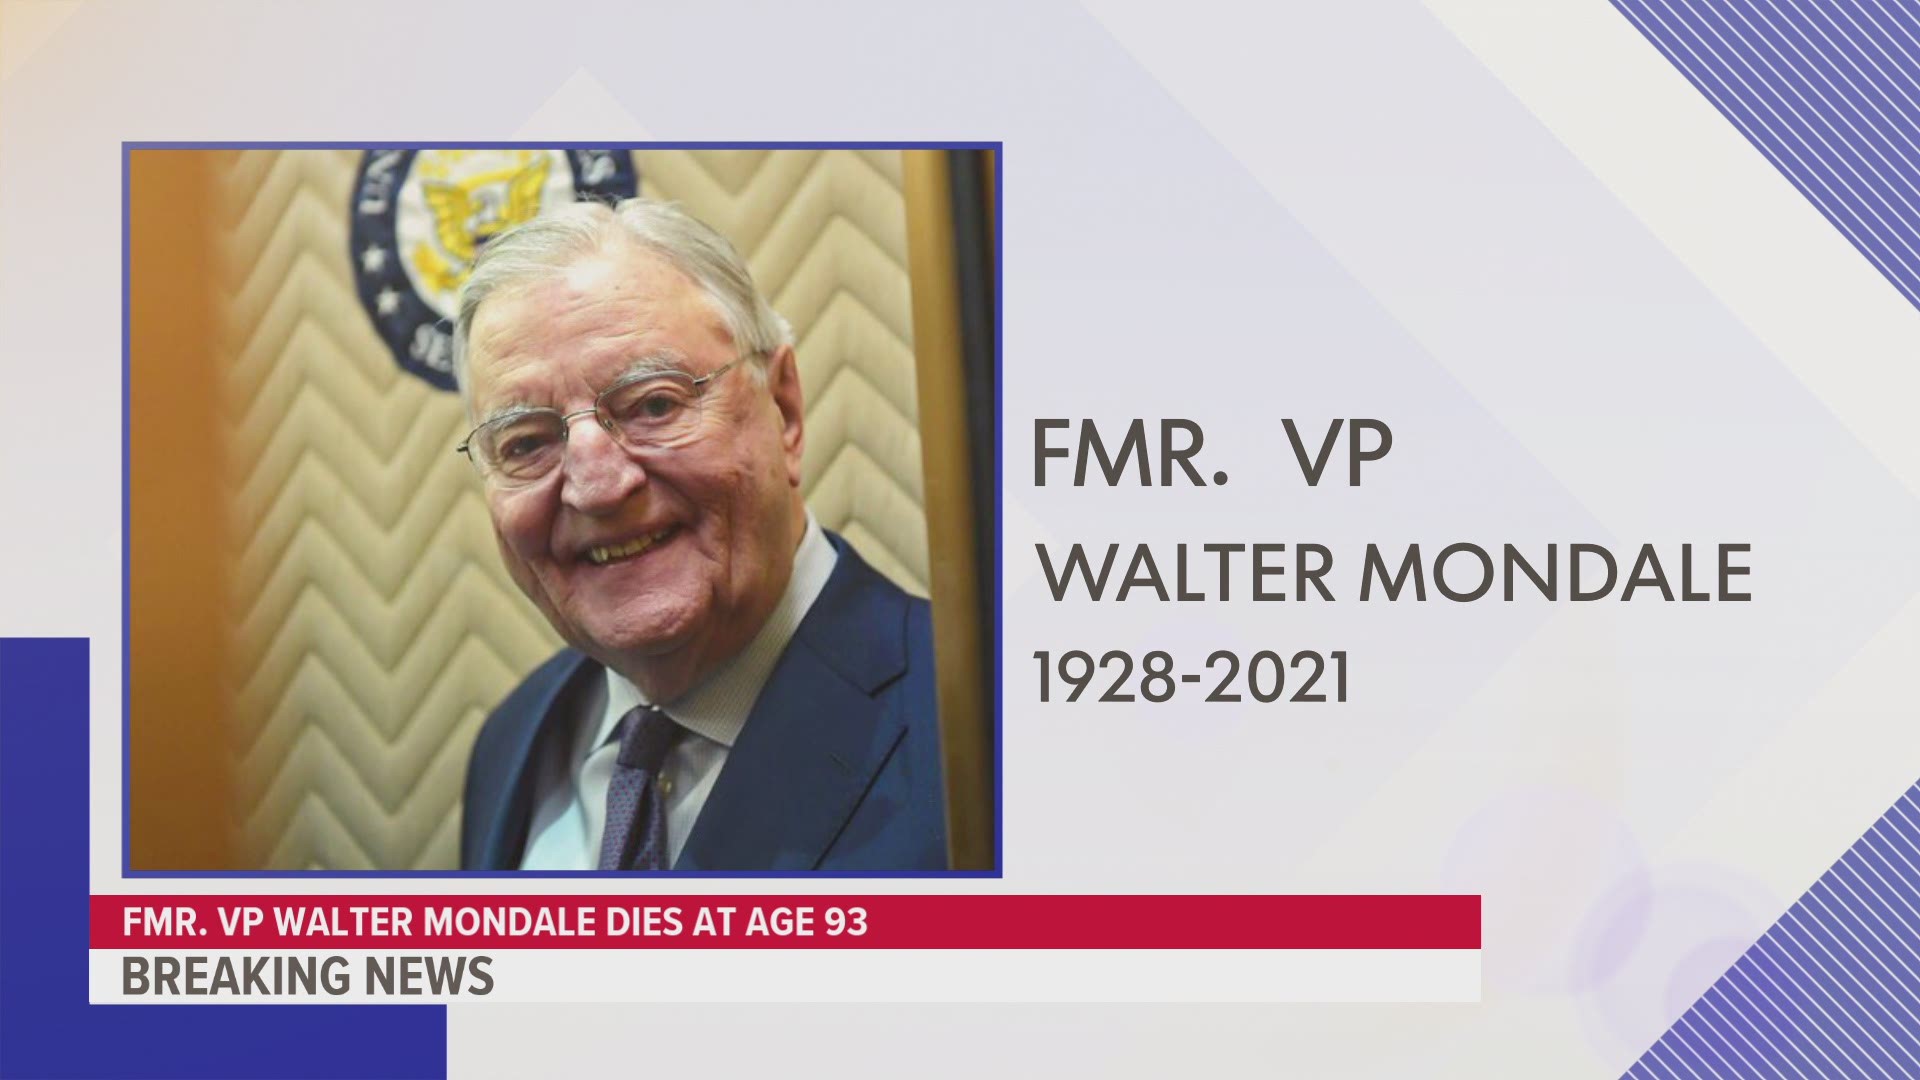 Walter Mondale was vice president under Jimmy Carter and battled Ronald Reagan for the presidency in 1984.